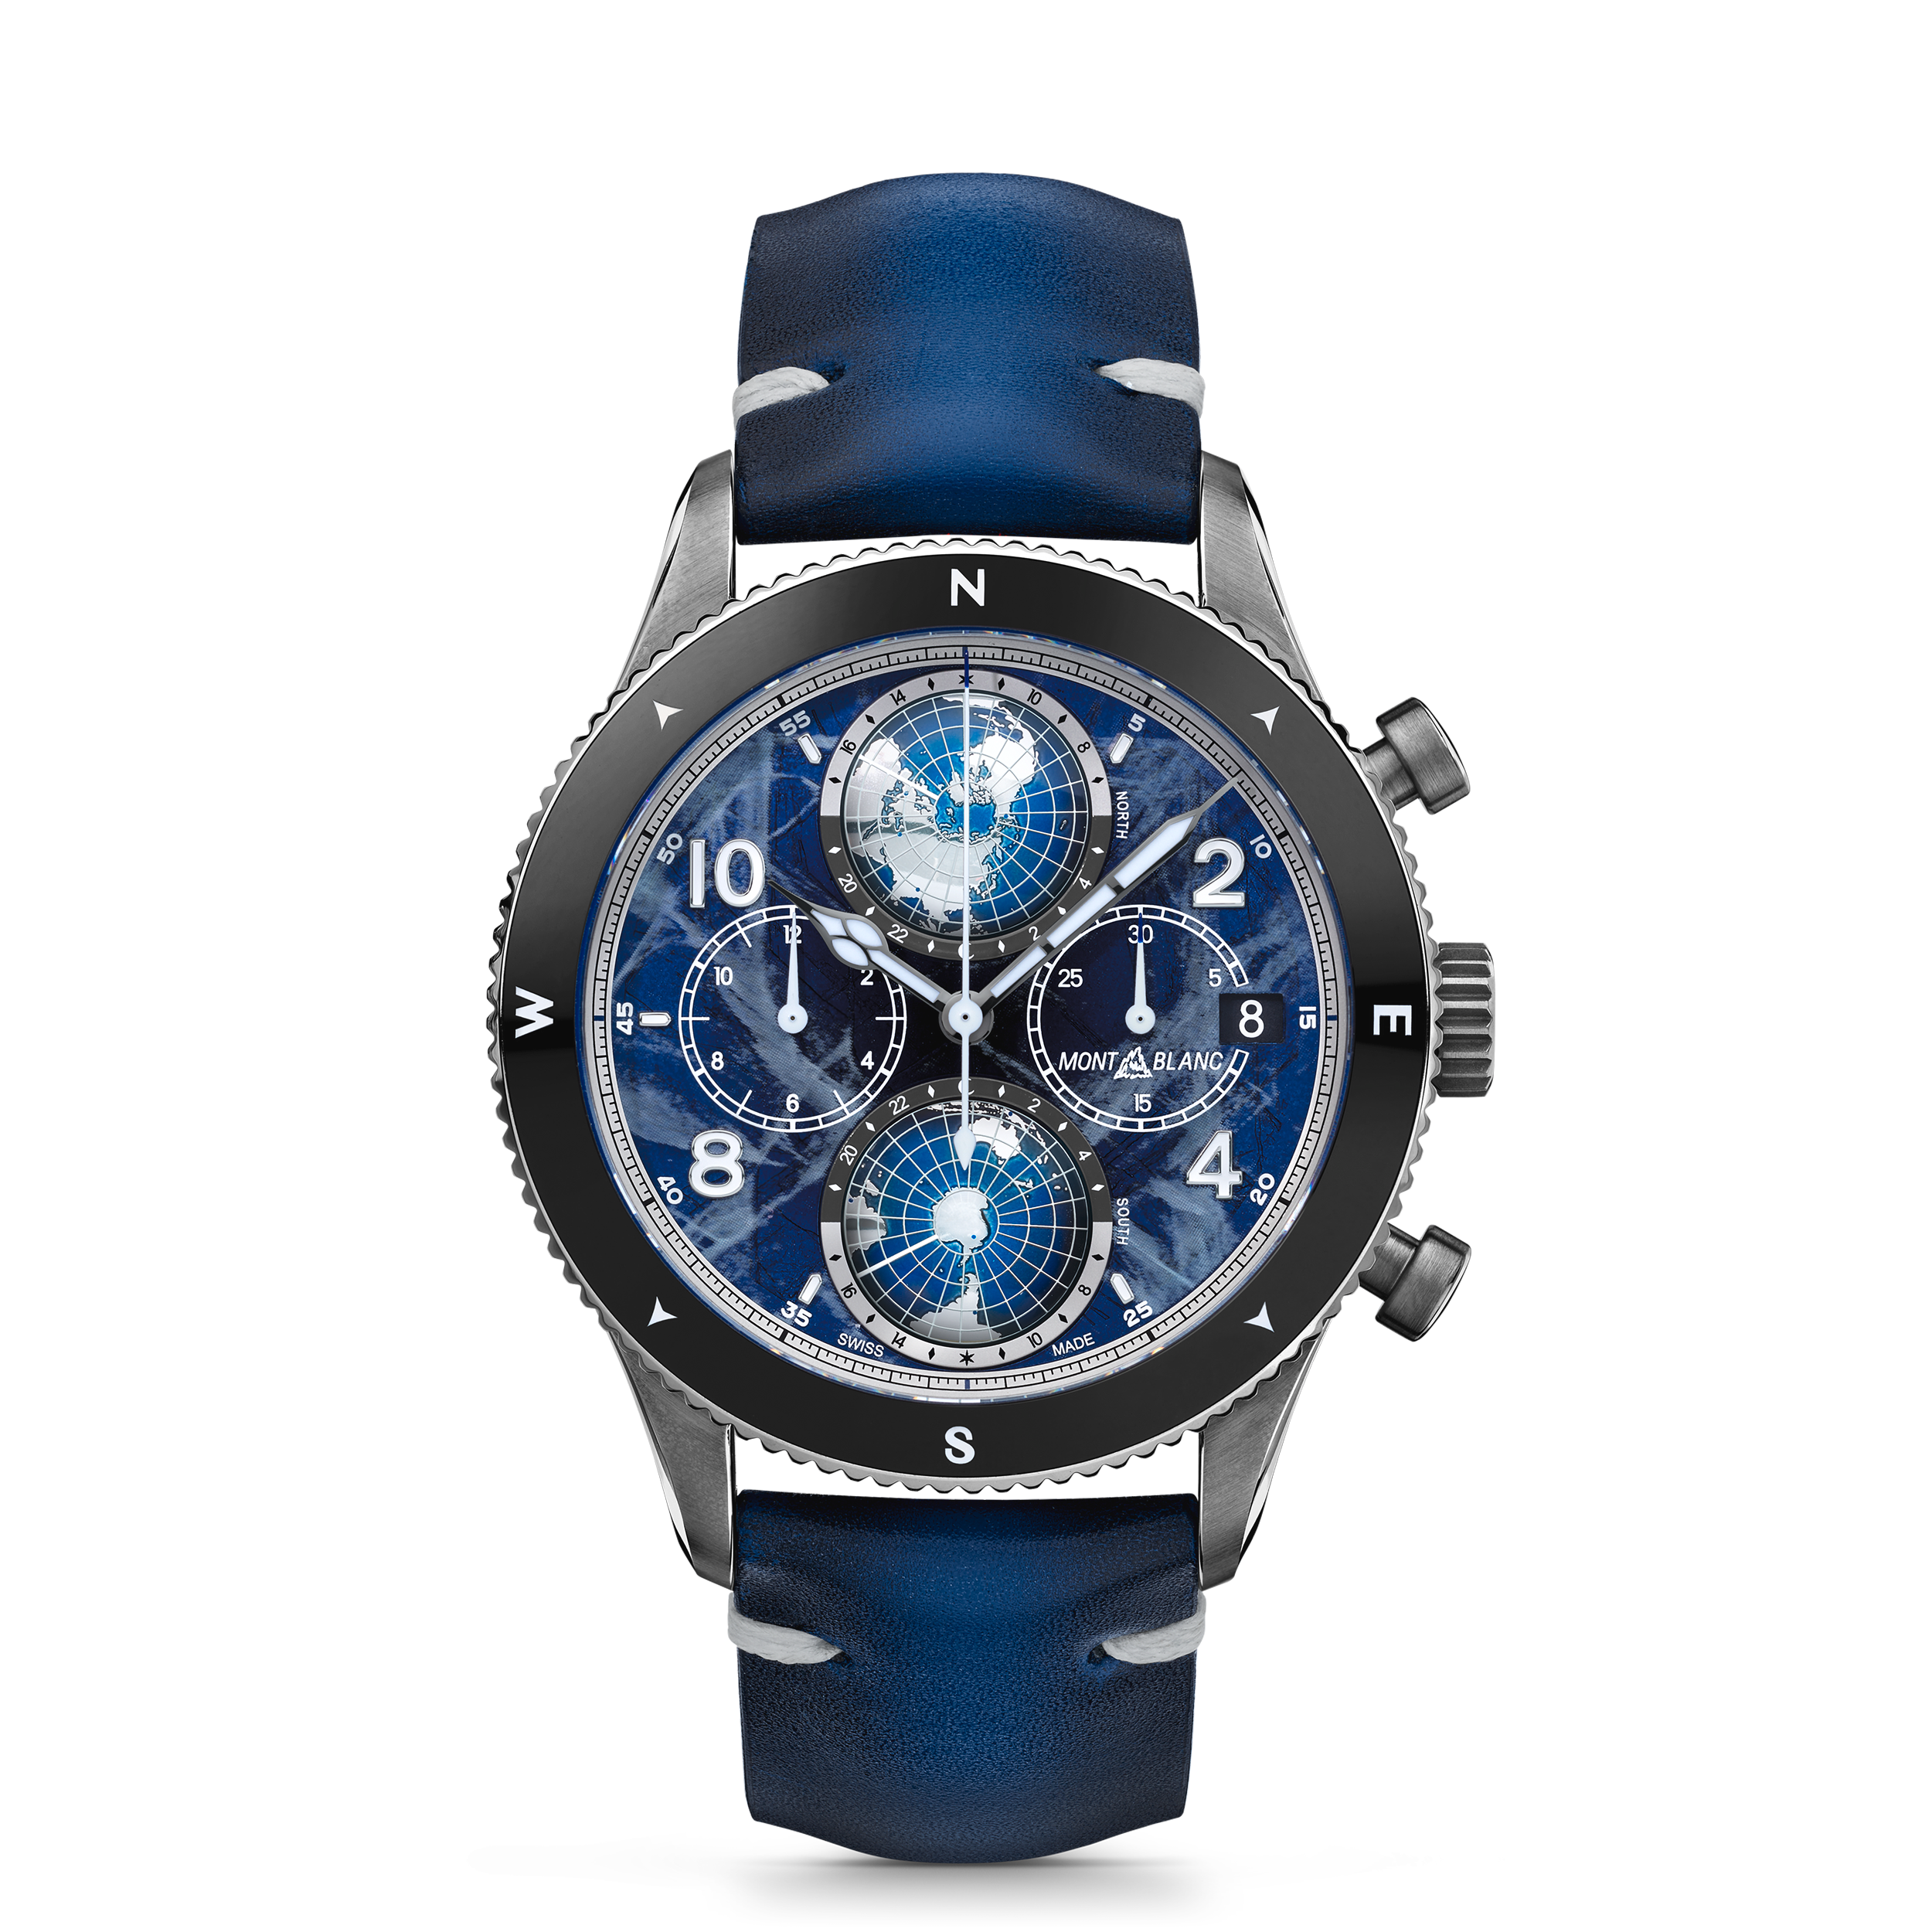 Montblanc 1858 Geosphere Chronograph 0 Oxygen Limited Edition - 290 pieces, image 1